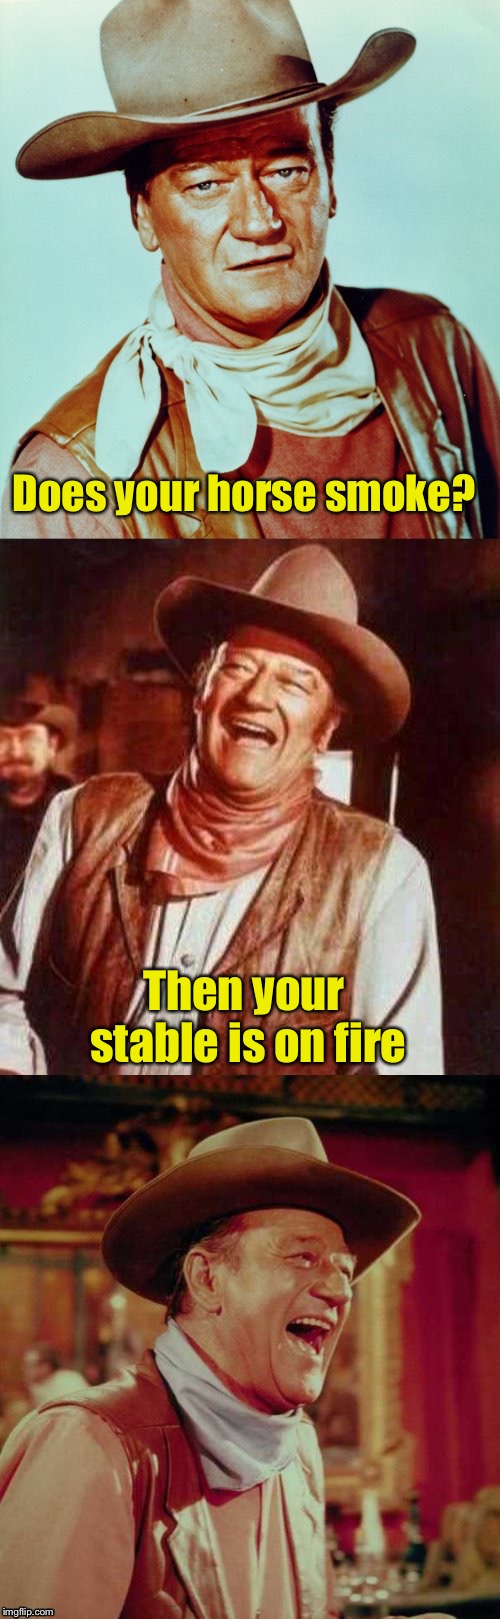 John Wayne Puns | Does your horse smoke? Then your stable is on fire | image tagged in john wayne puns | made w/ Imgflip meme maker